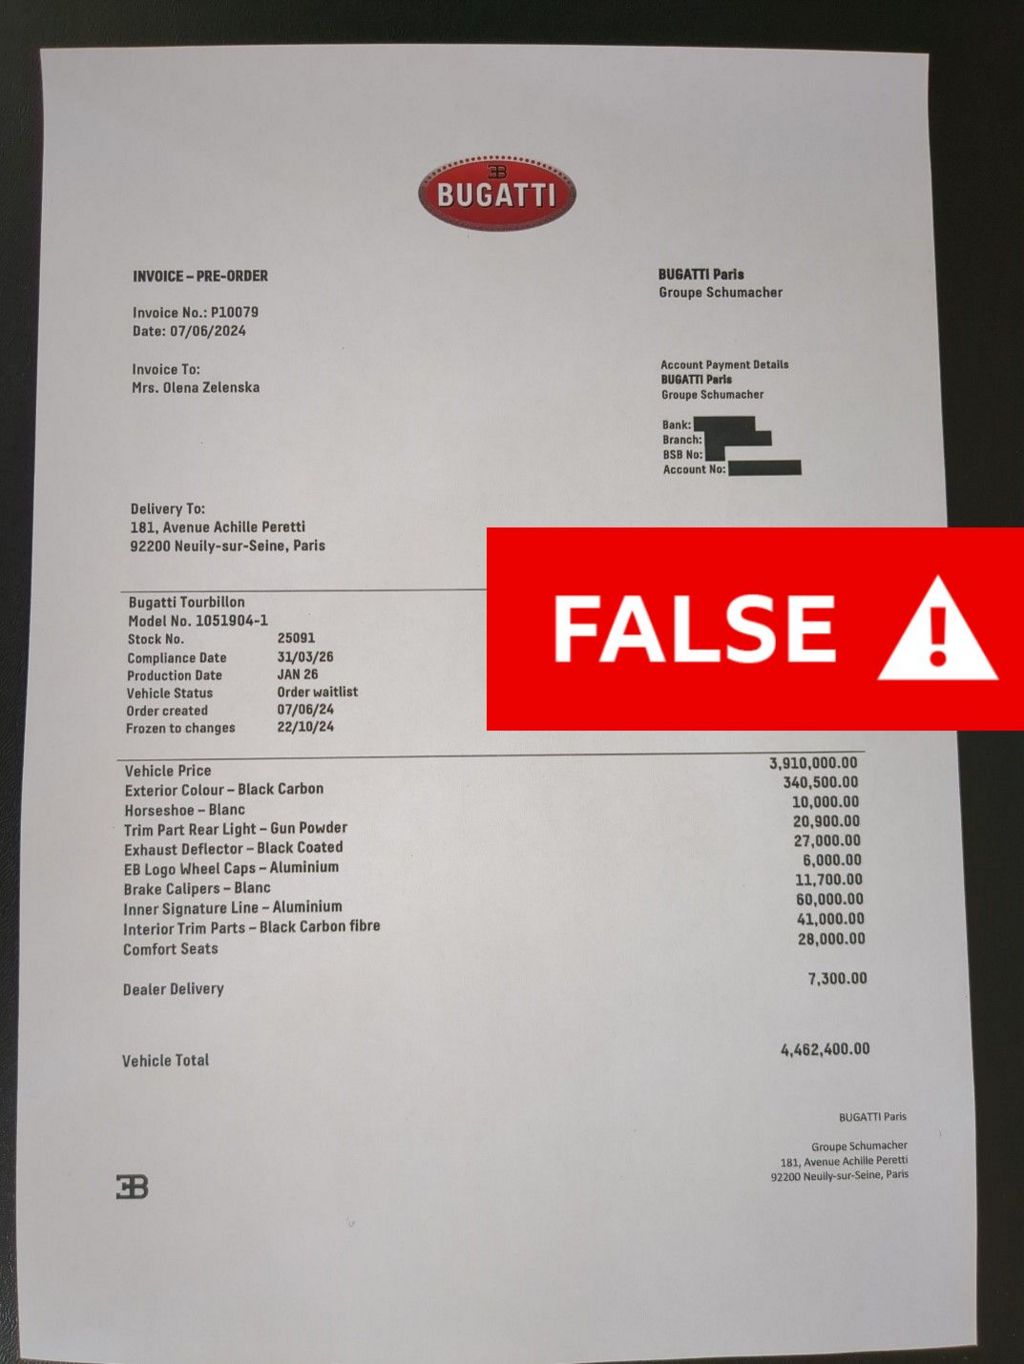 A fake version of an invoice from a Bugatti dealership, with a "FAKE" stamp on it